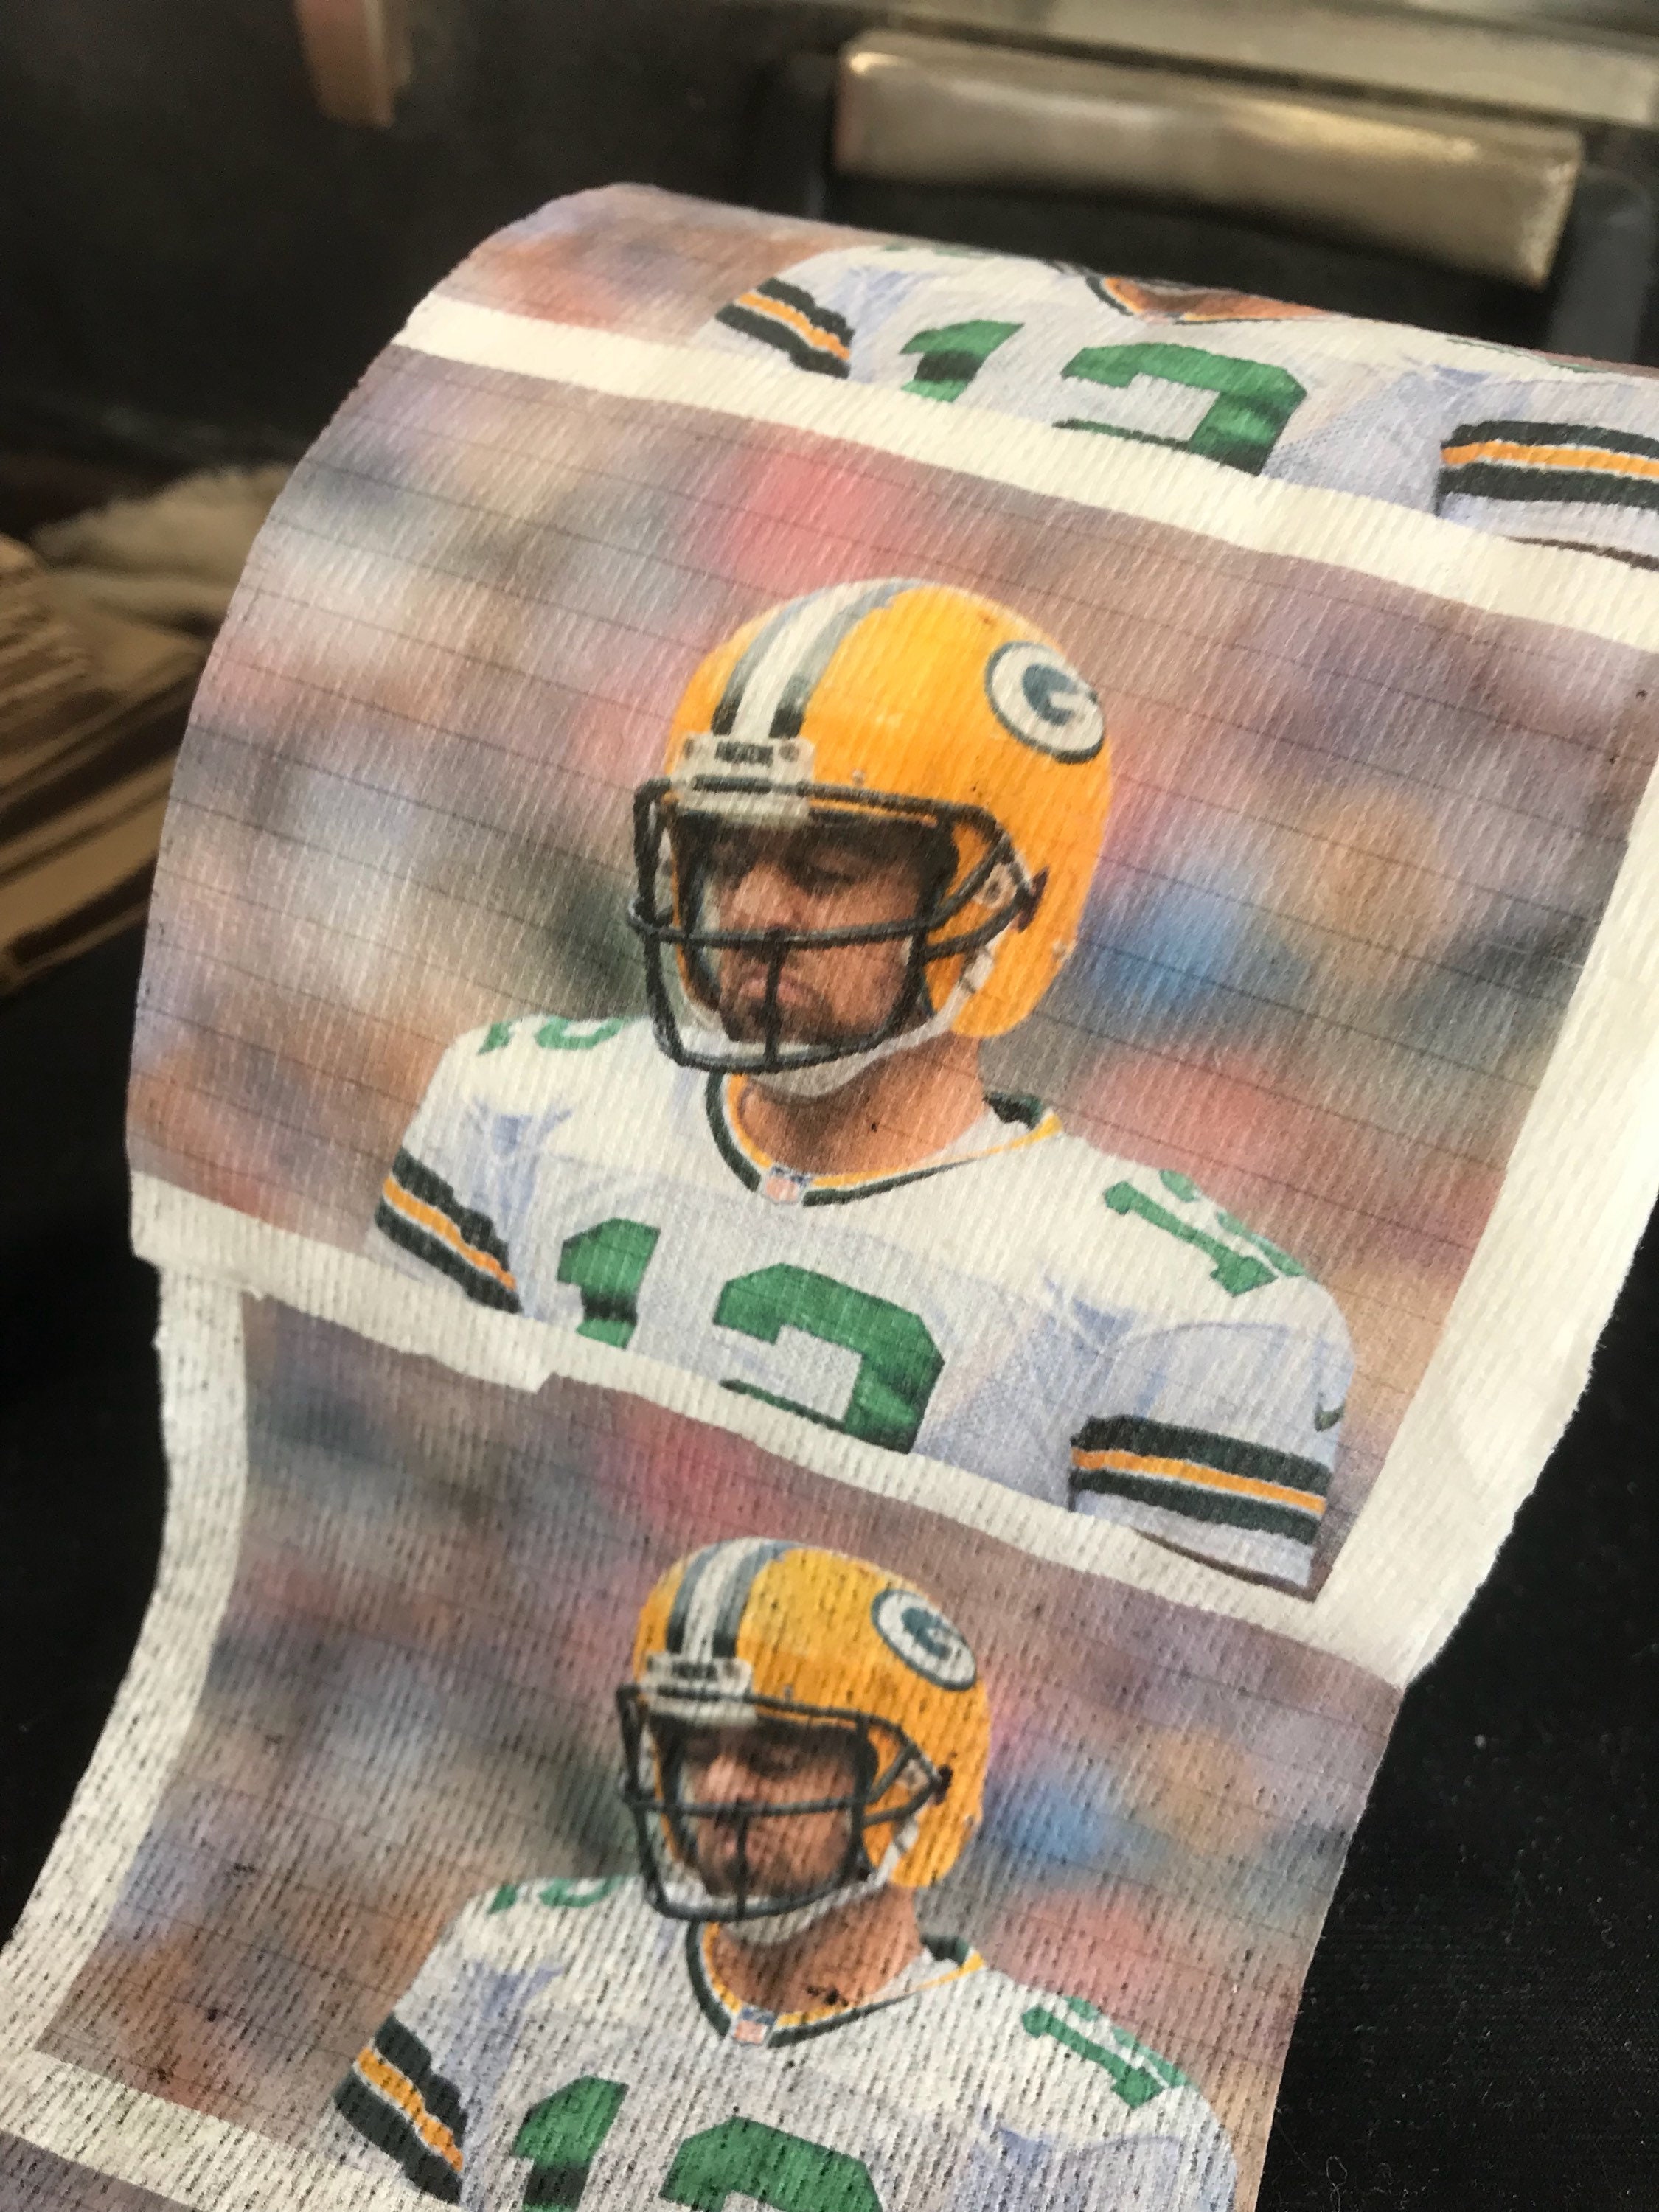 green bay packers toilet paper